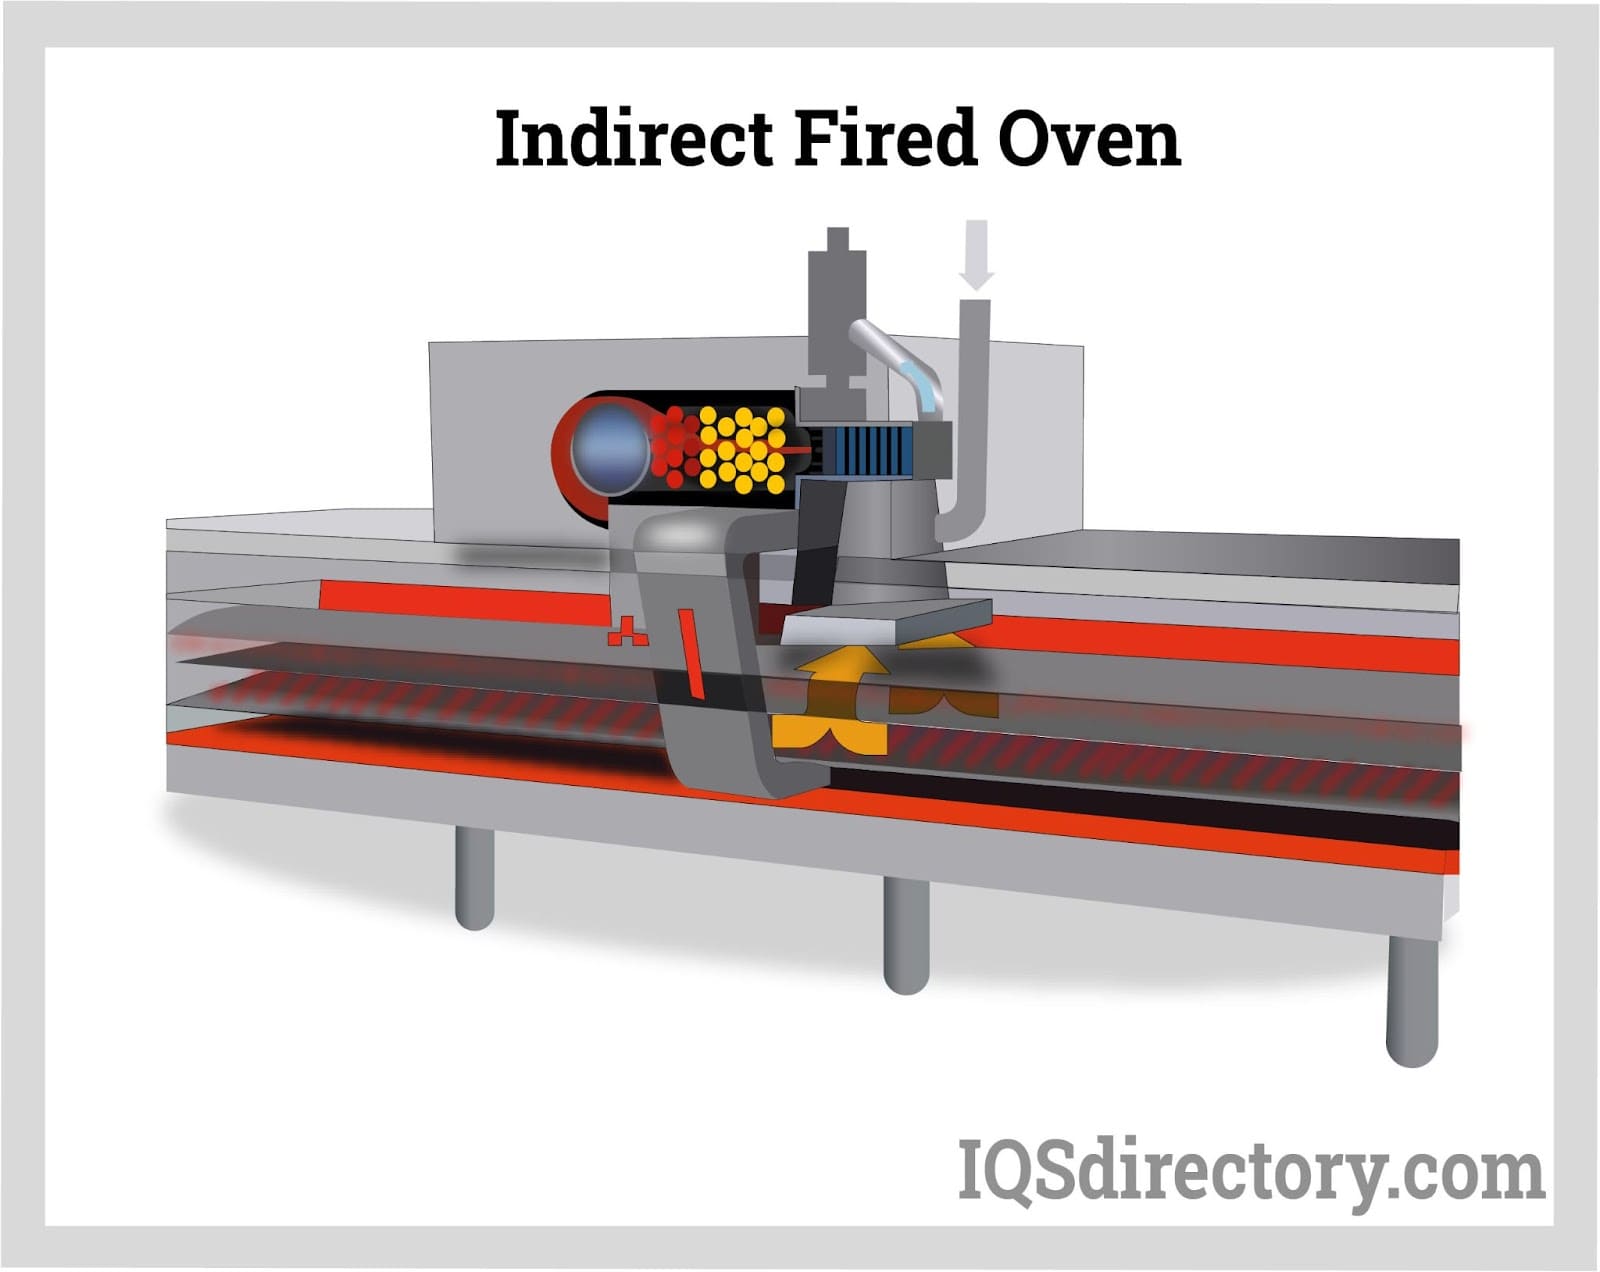 Indirect Fired Oven